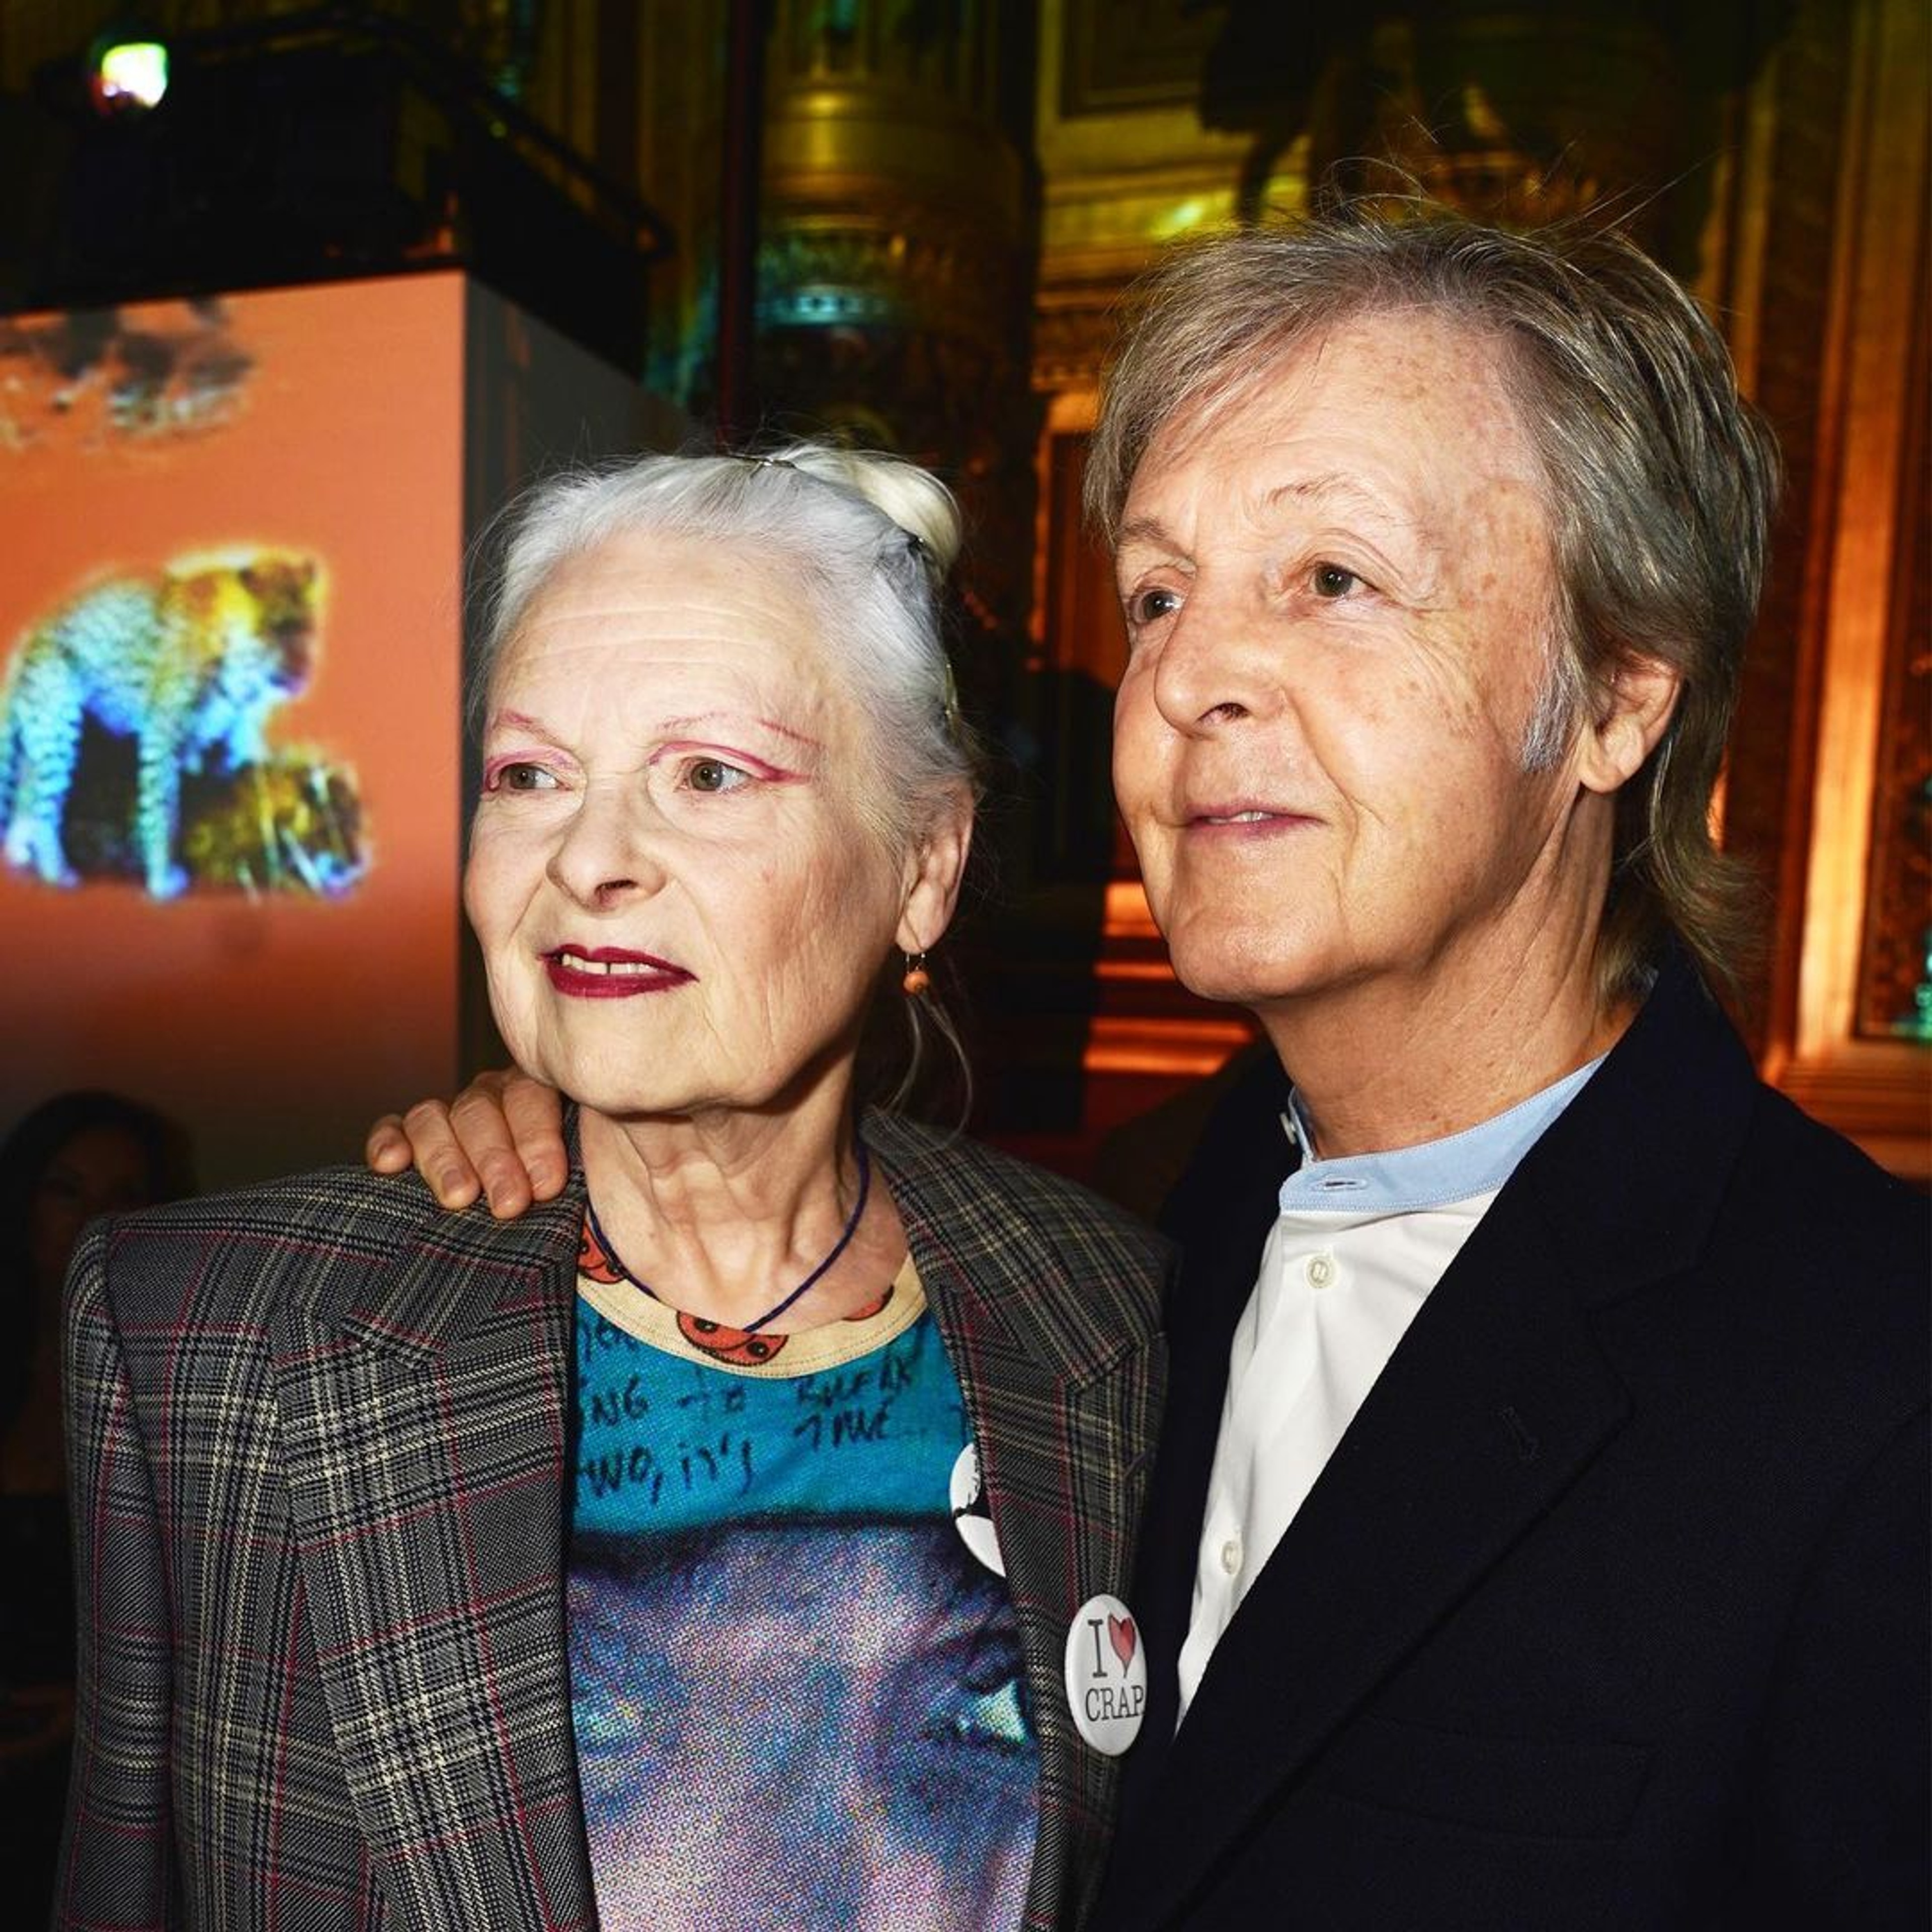 photo of Vivienne Westwood with Paul McCartney in 2019 at Stella McCartney's Paris Fashion show